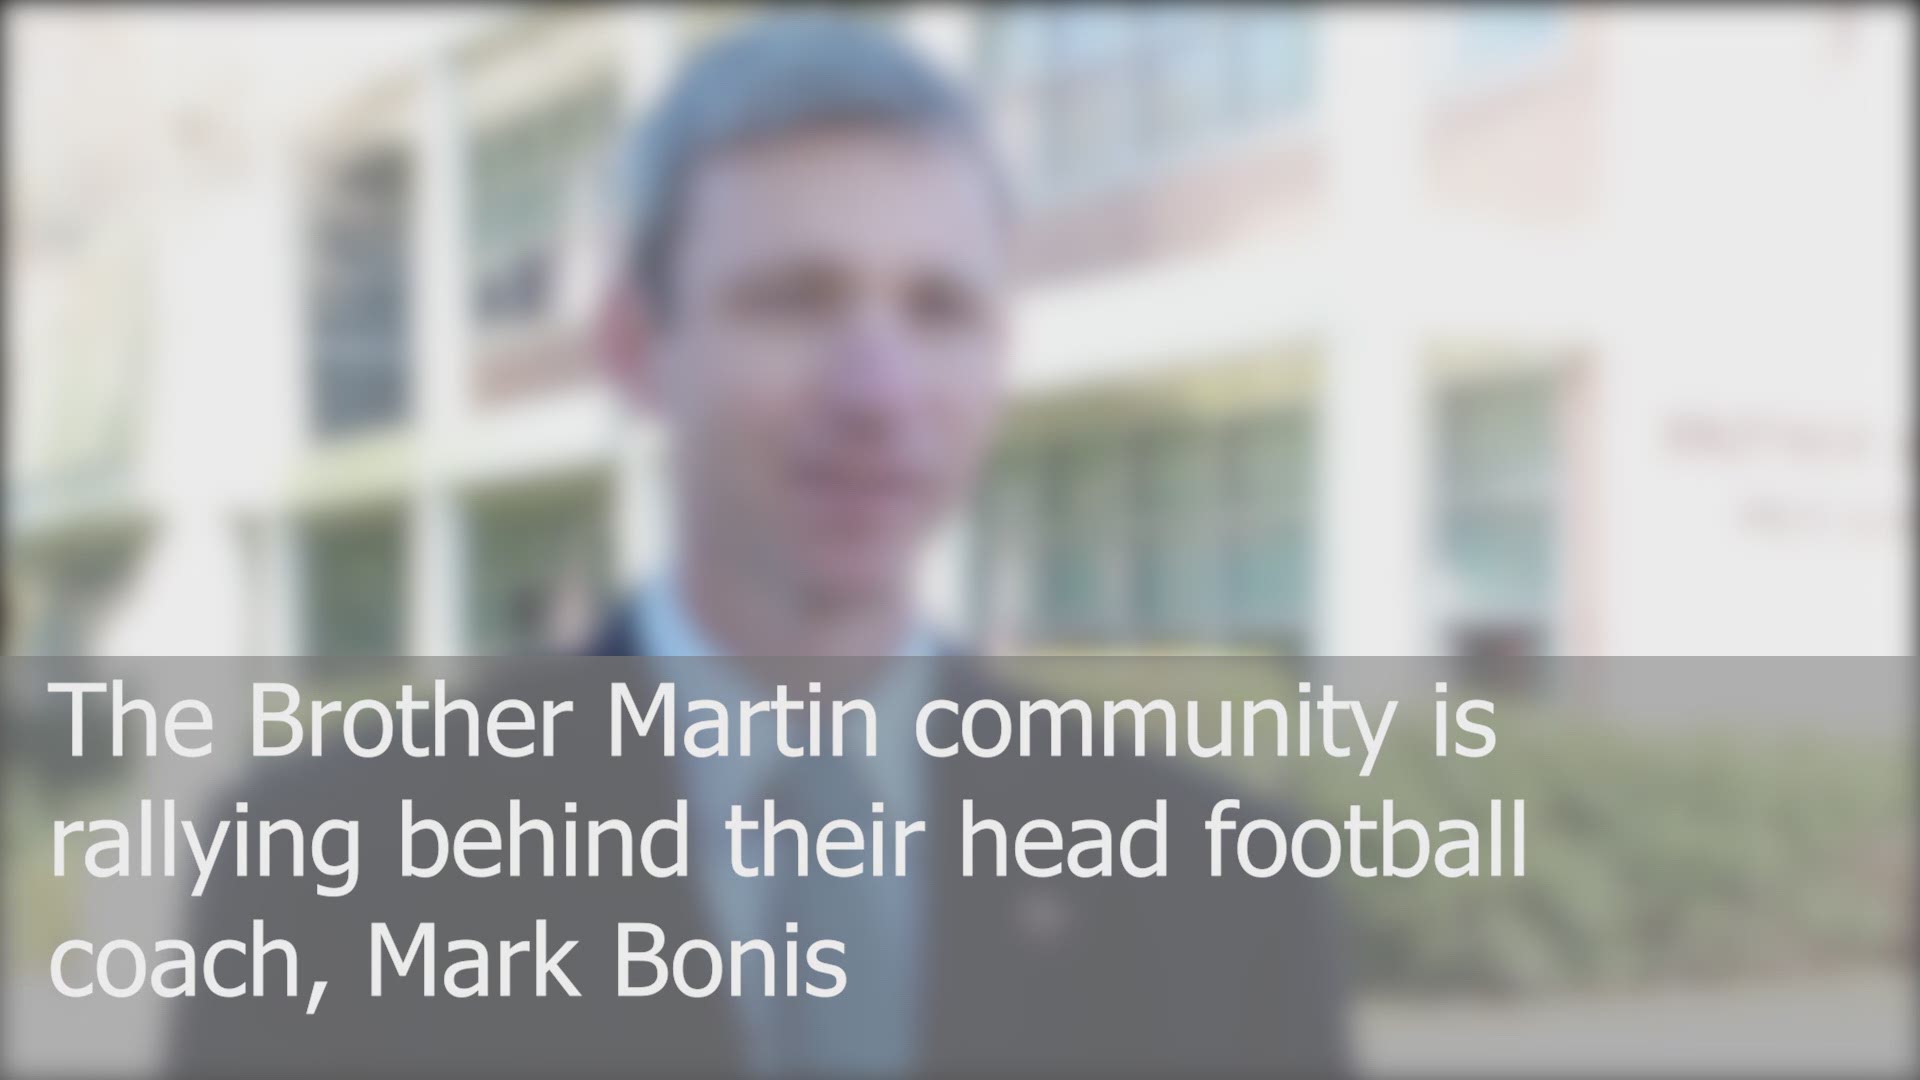 Students rally behind Brother Martin coach